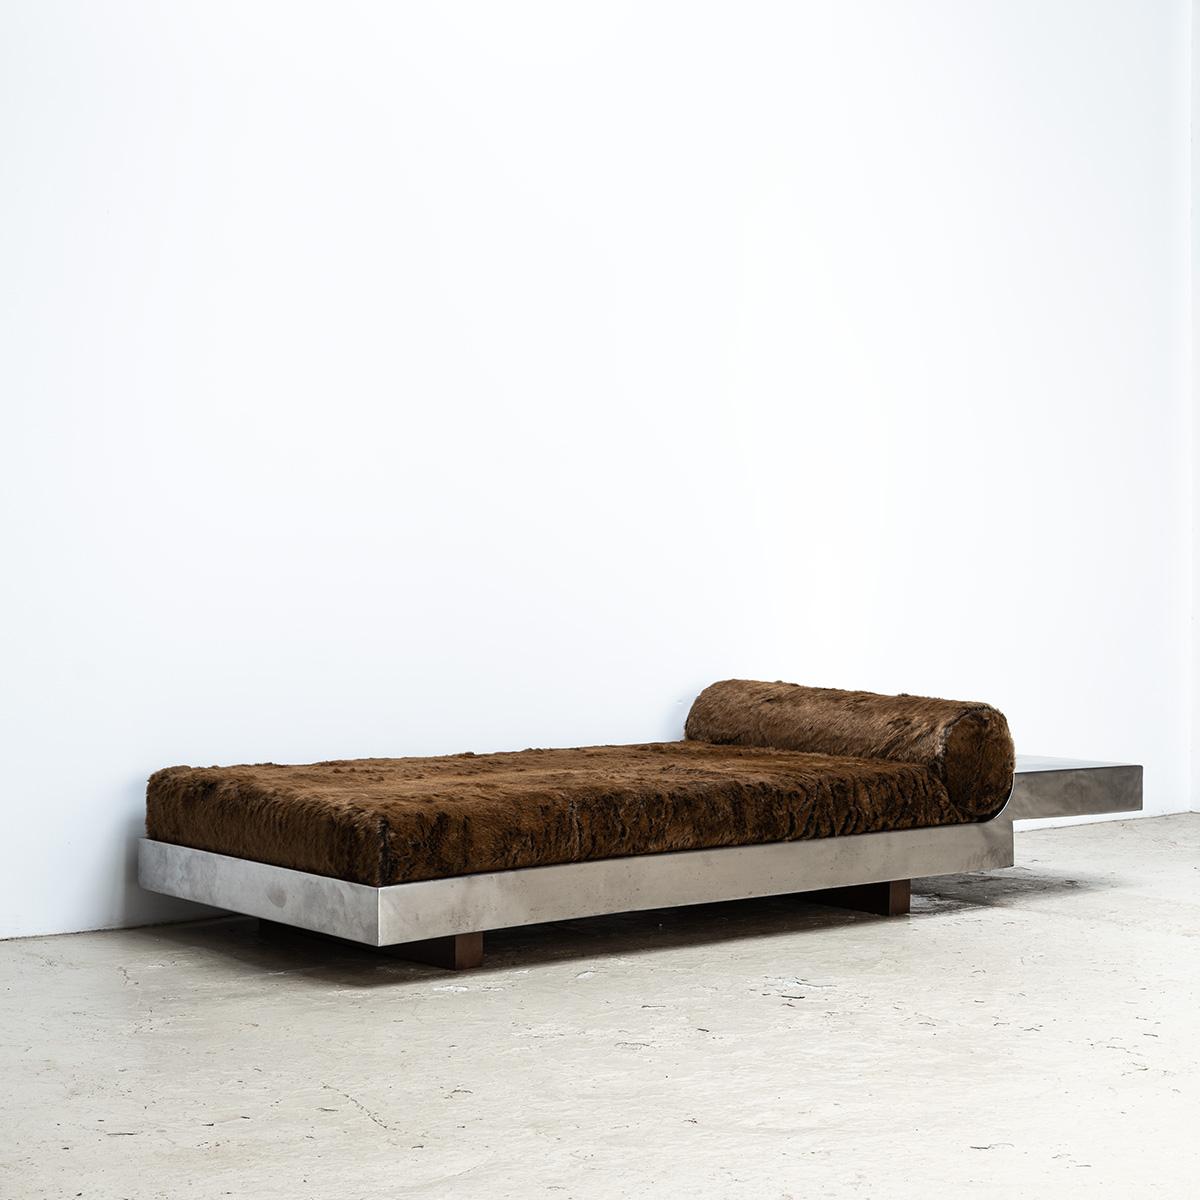 One Arm “Banquet” Bed, Maria Pergay, C. 1967 For Sale